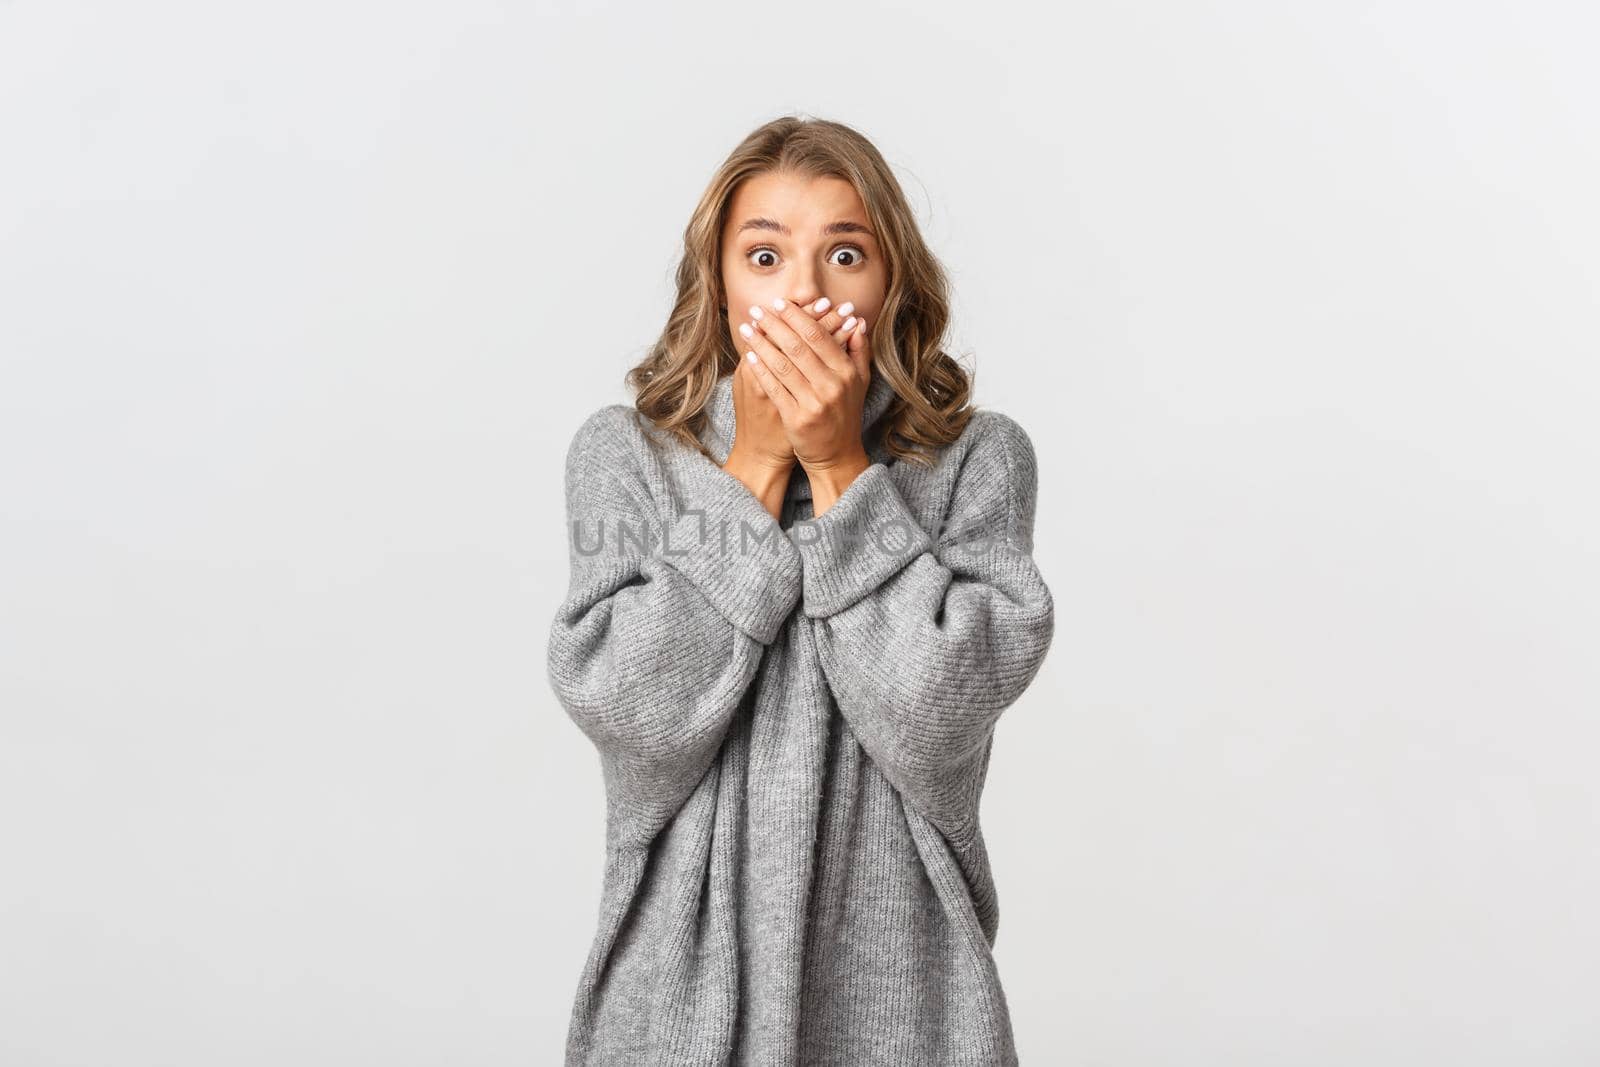 Portrait of blond girl looking shocked and scared at something alarming, gasping and cover mouth, standing over white background.